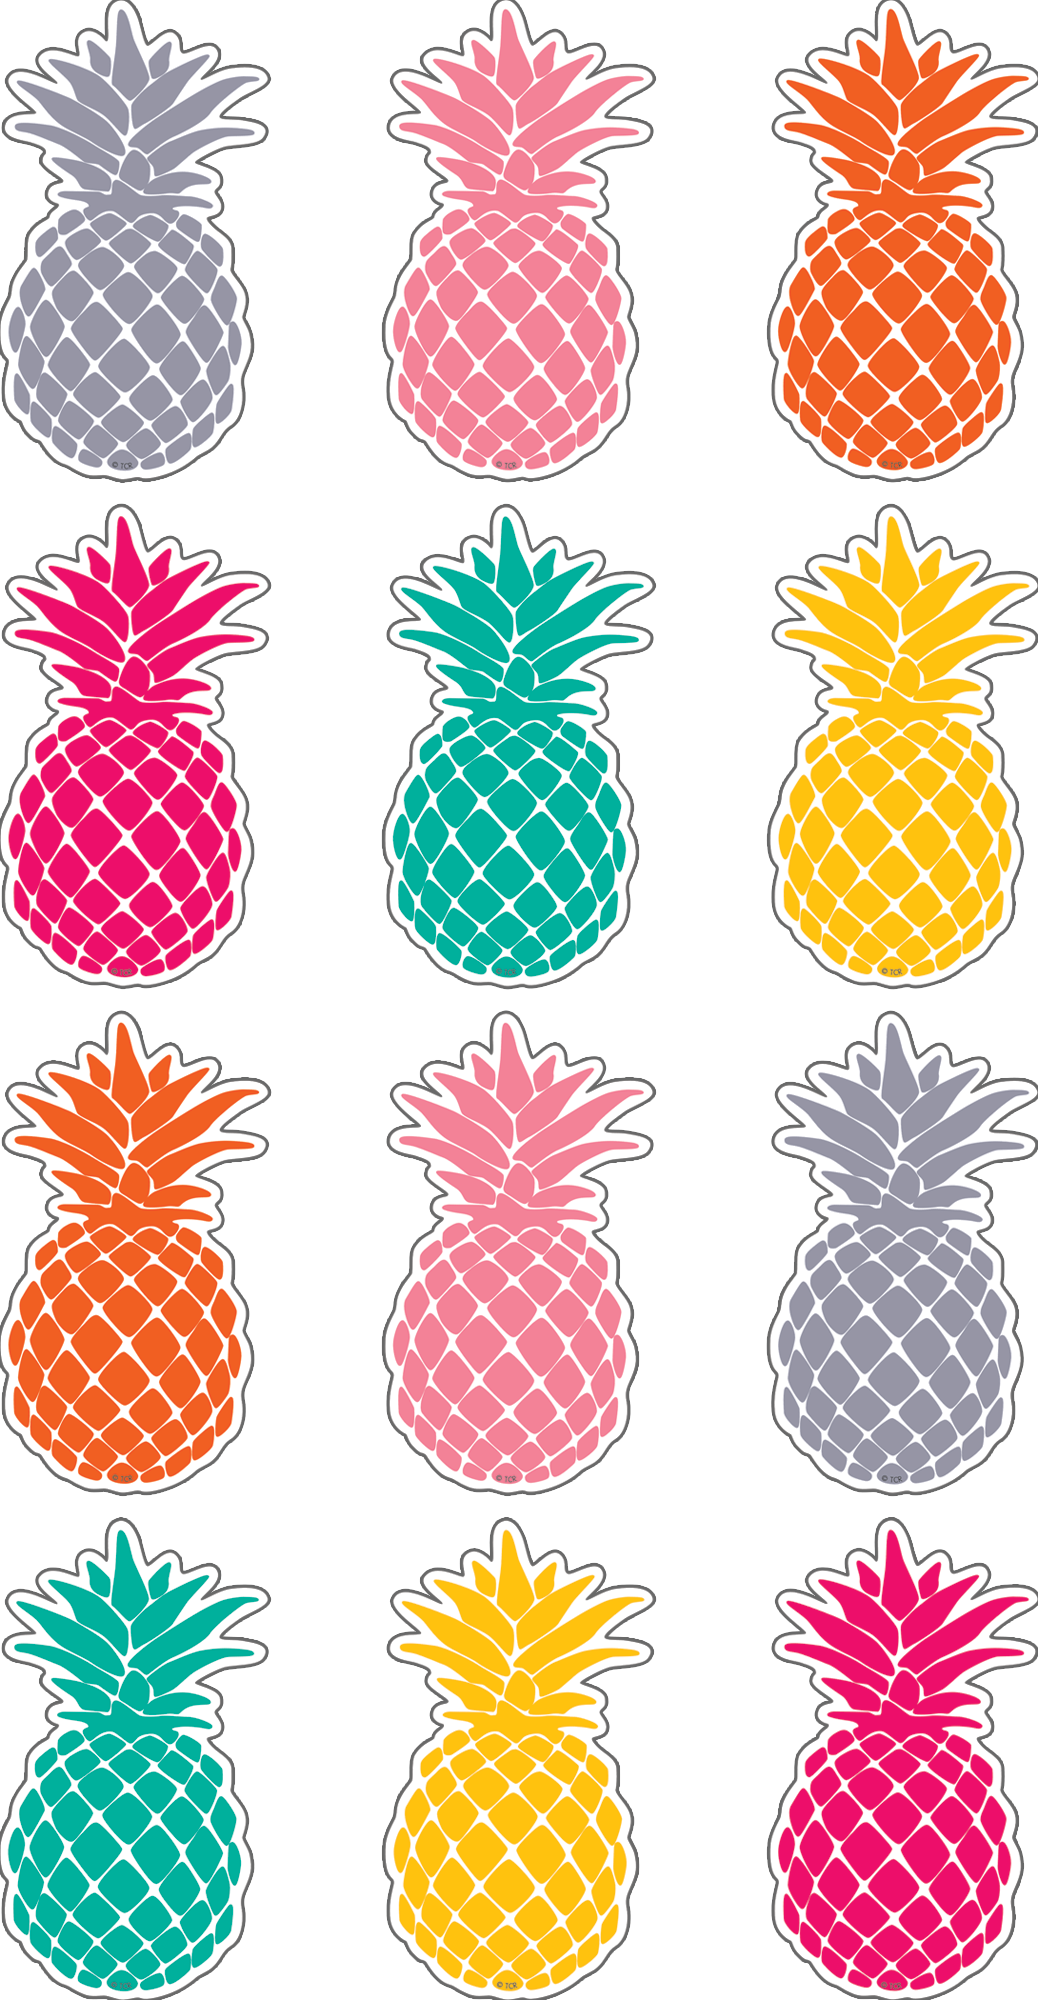 Sunglasses clipart pineapple. Tropical punch pineapples mini